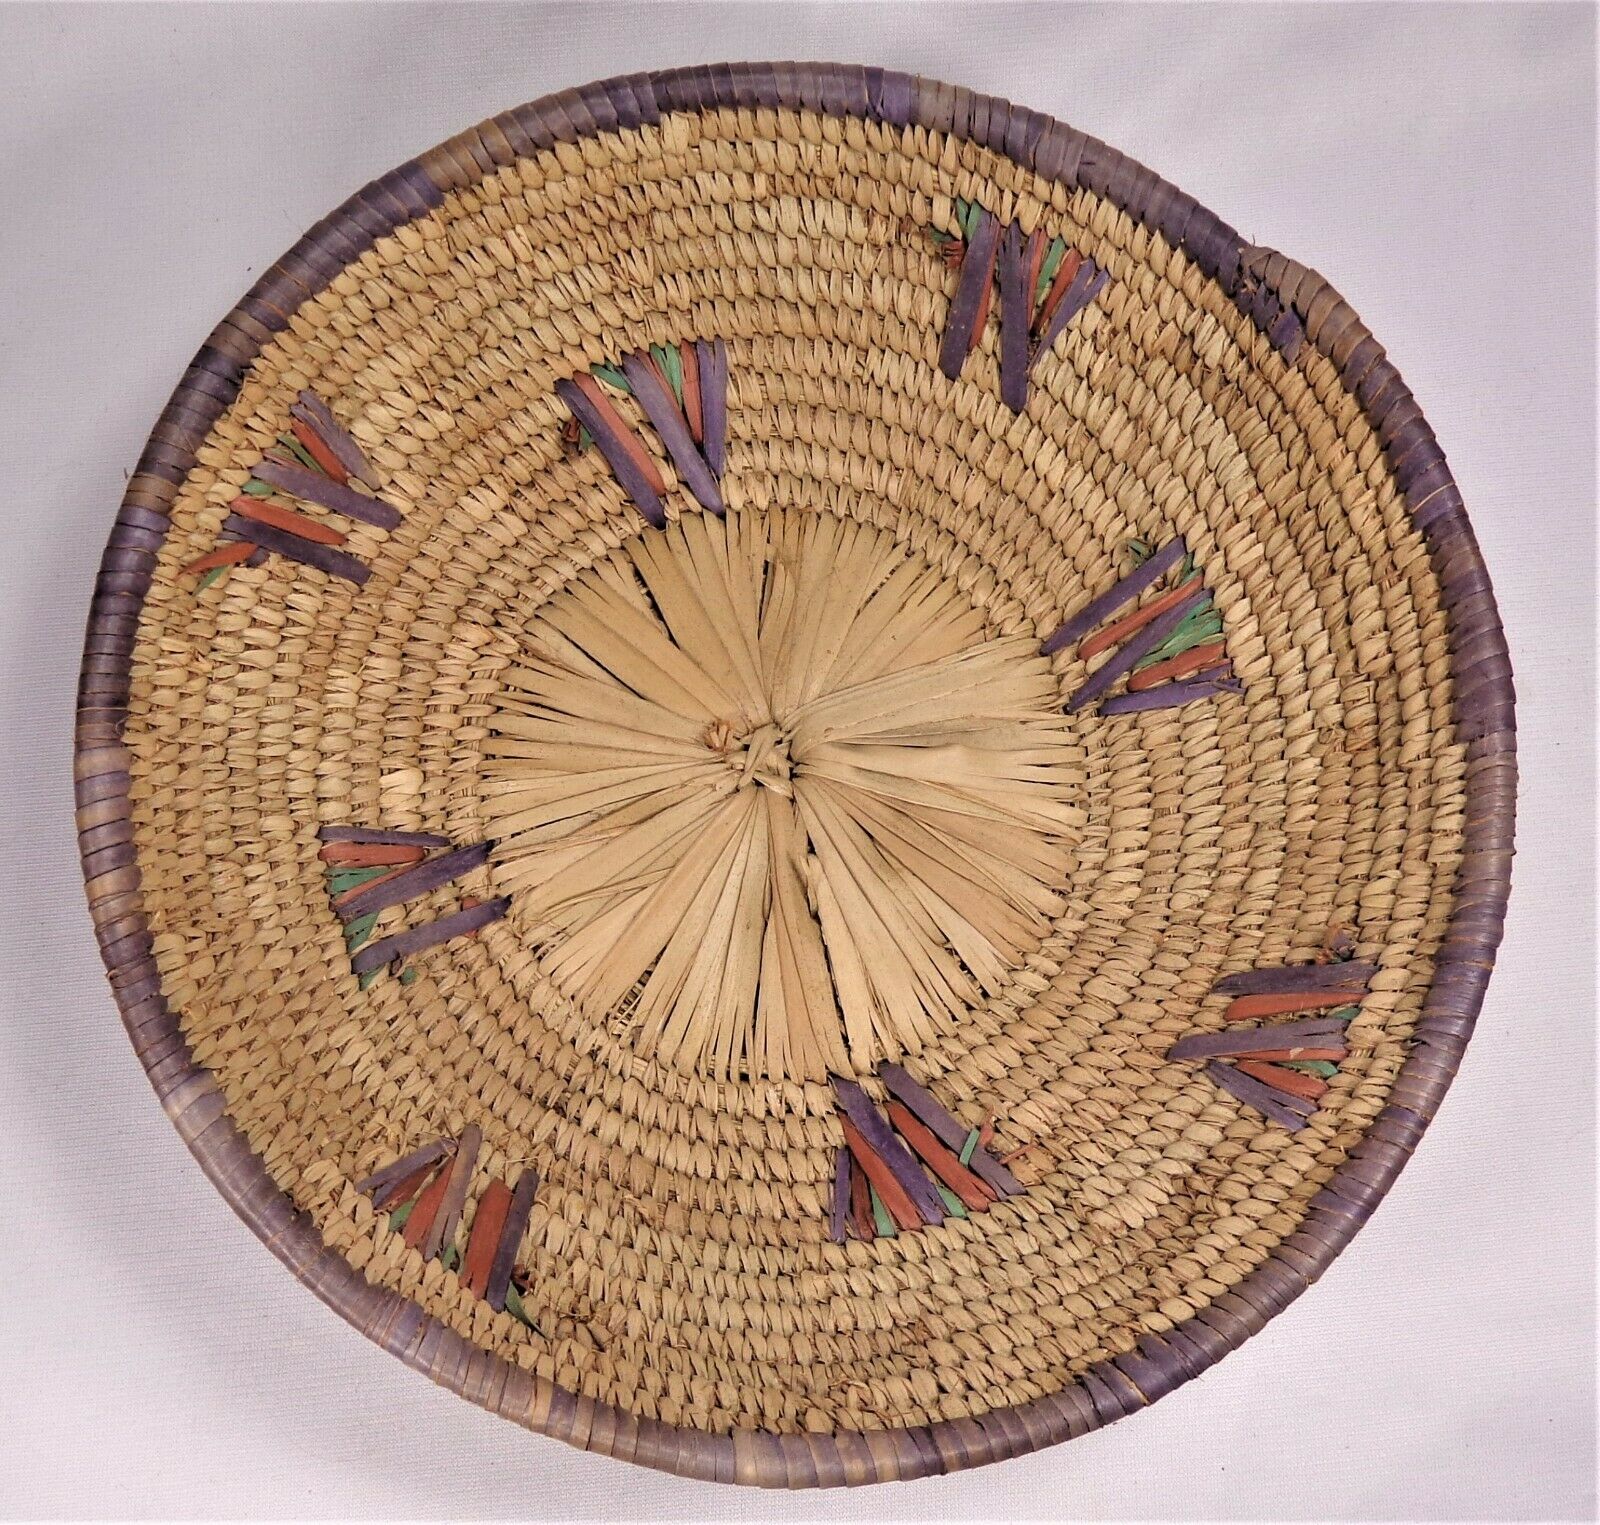 Vintage African (likely Nigeria Hausa Tribe) 9" Woven Coil Grass Basket, Bowl